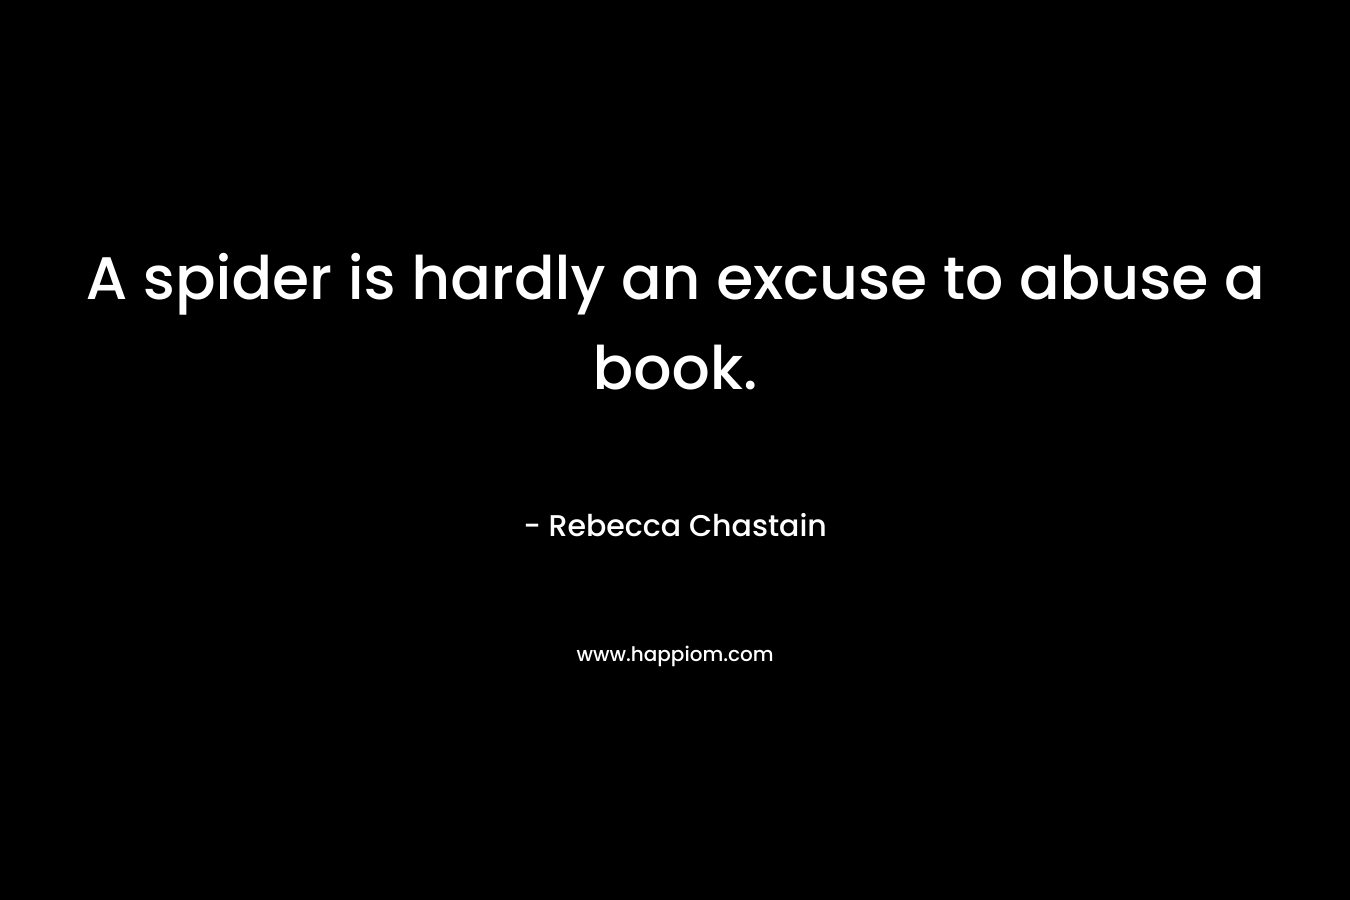 A spider is hardly an excuse to abuse a book.